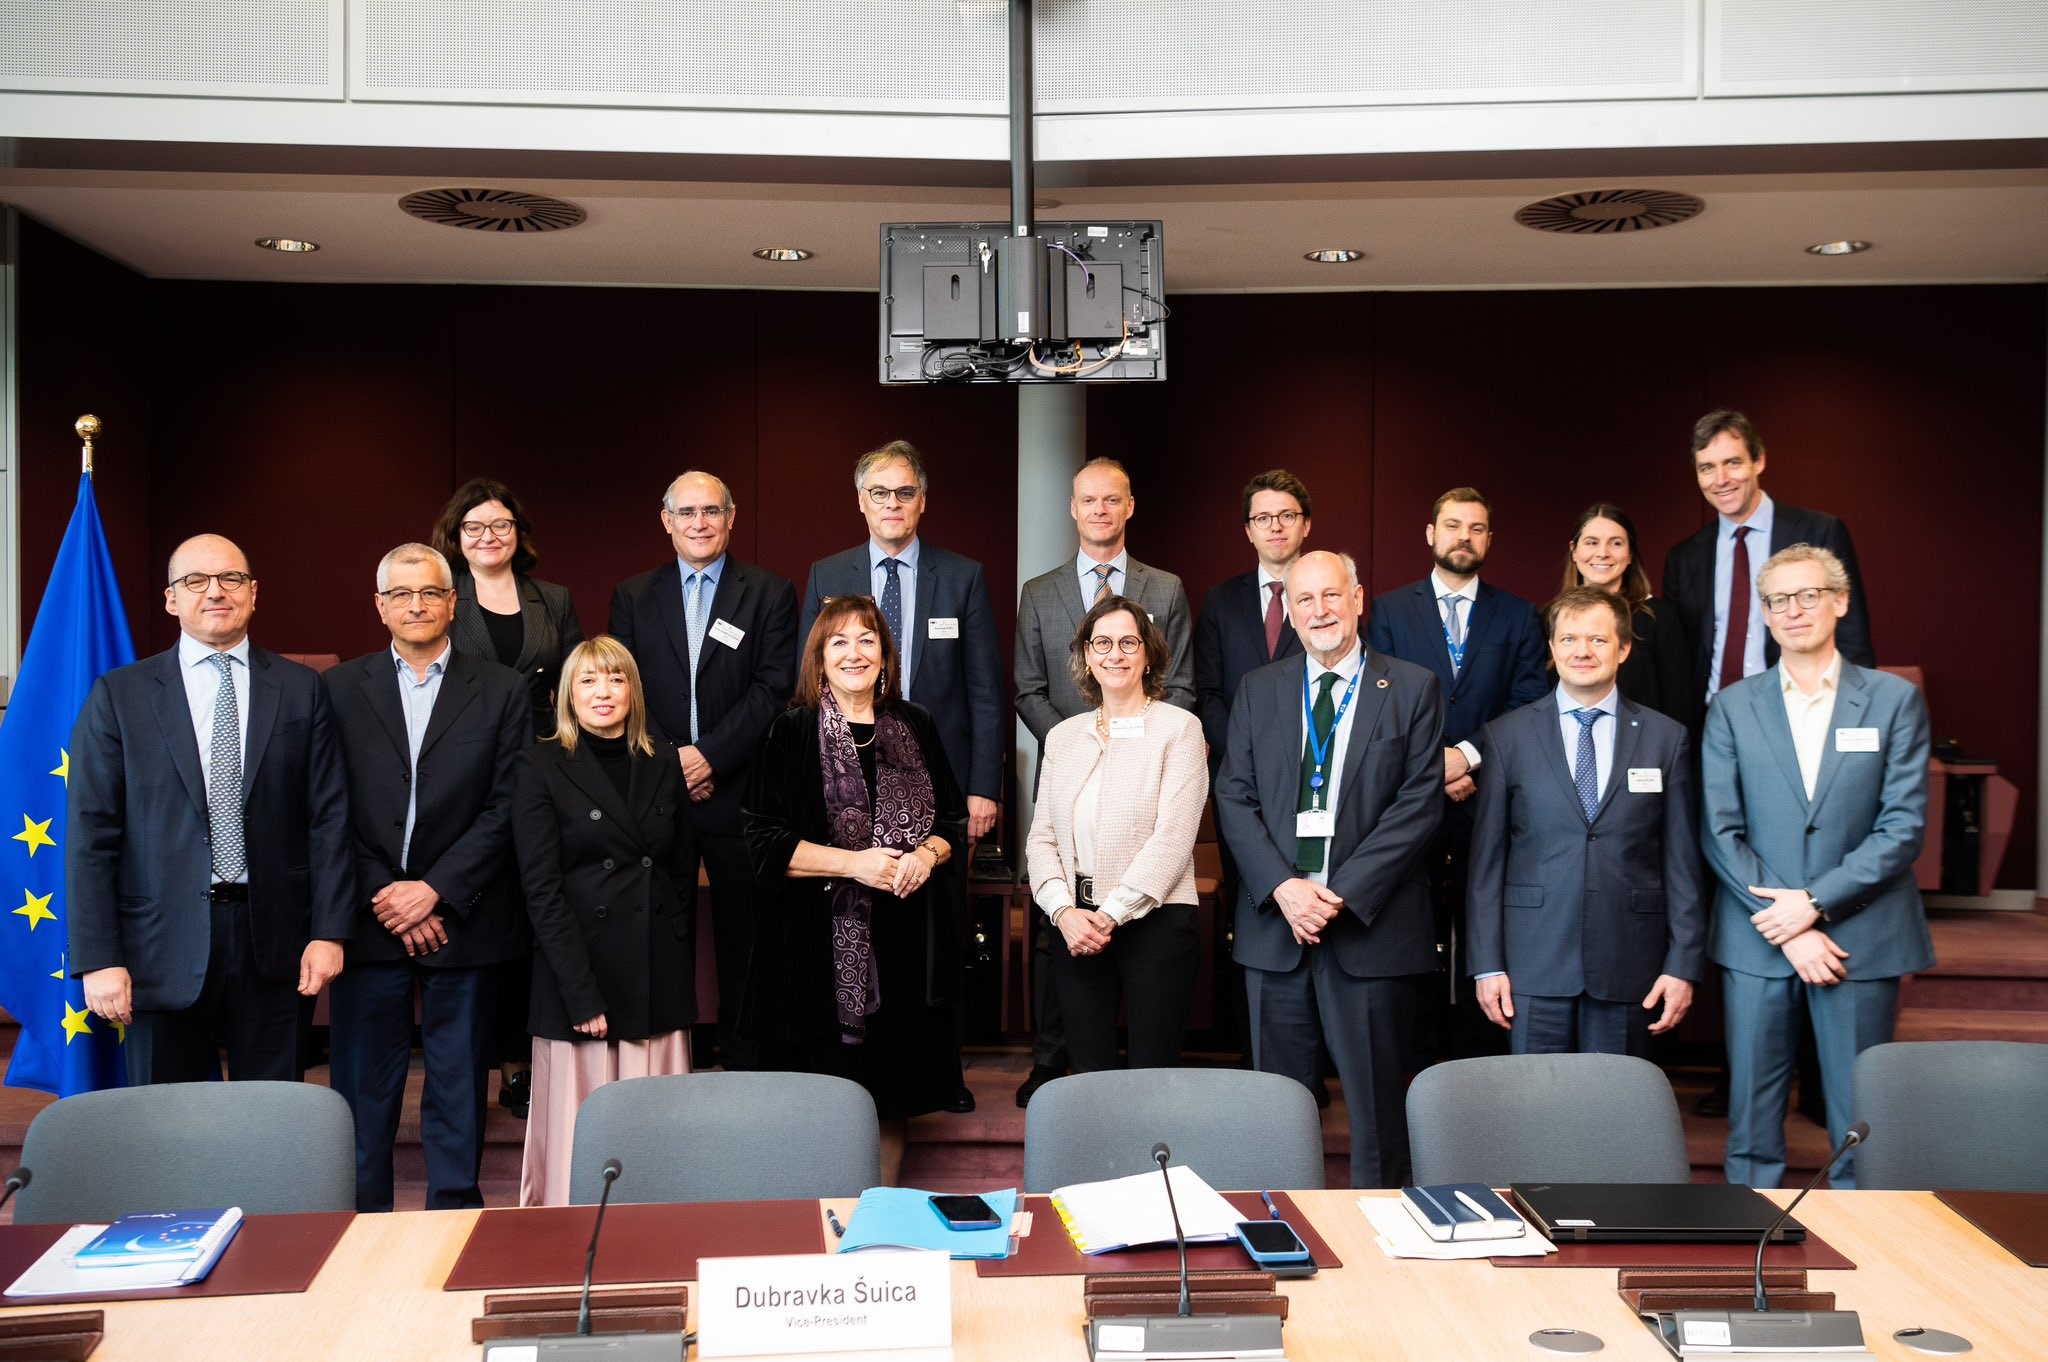 EU Vice president Dubravka Suica in a group photo with Population Europe experts